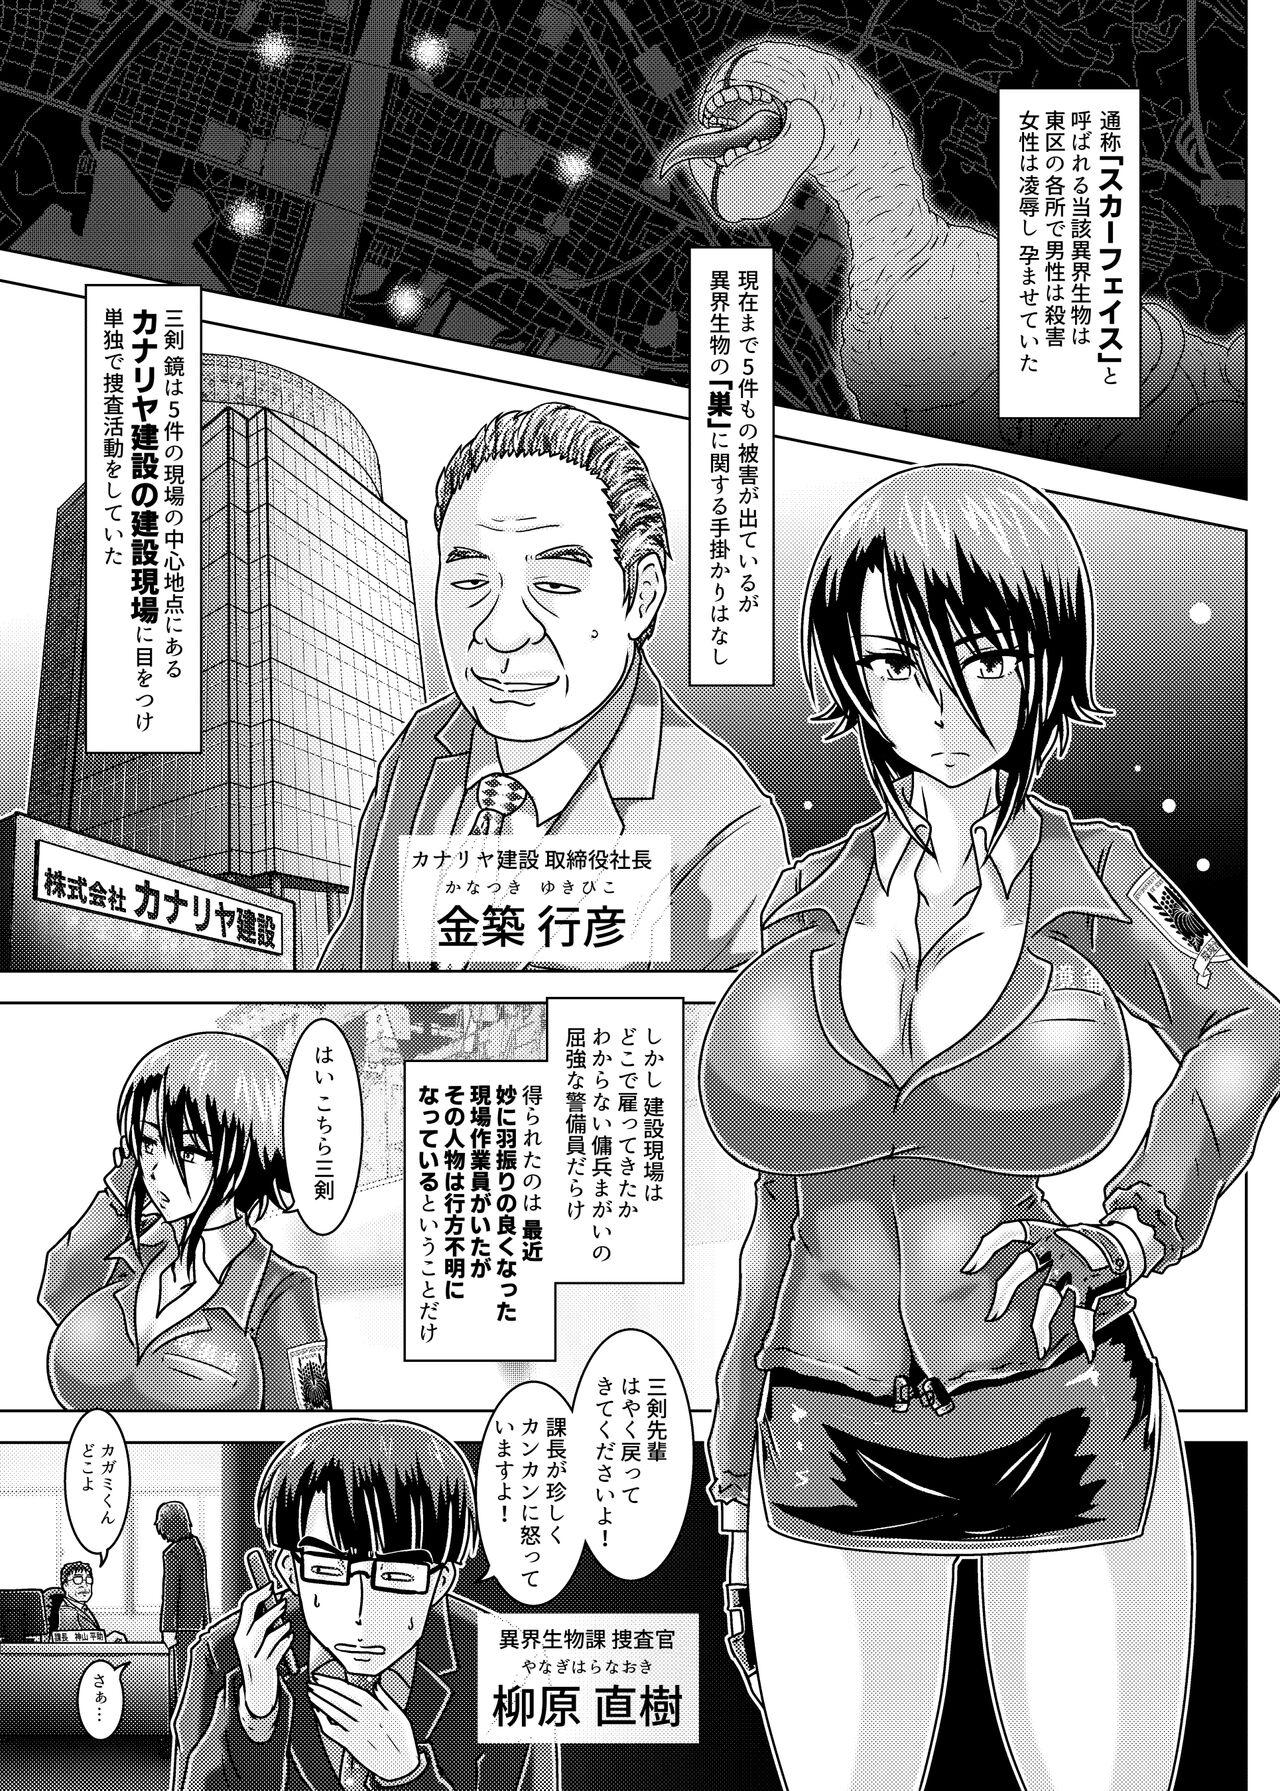 Public Sex TRIAL PRODUCT - 環境治安局捜査官・三剣鏡 Gayemo - Page 6